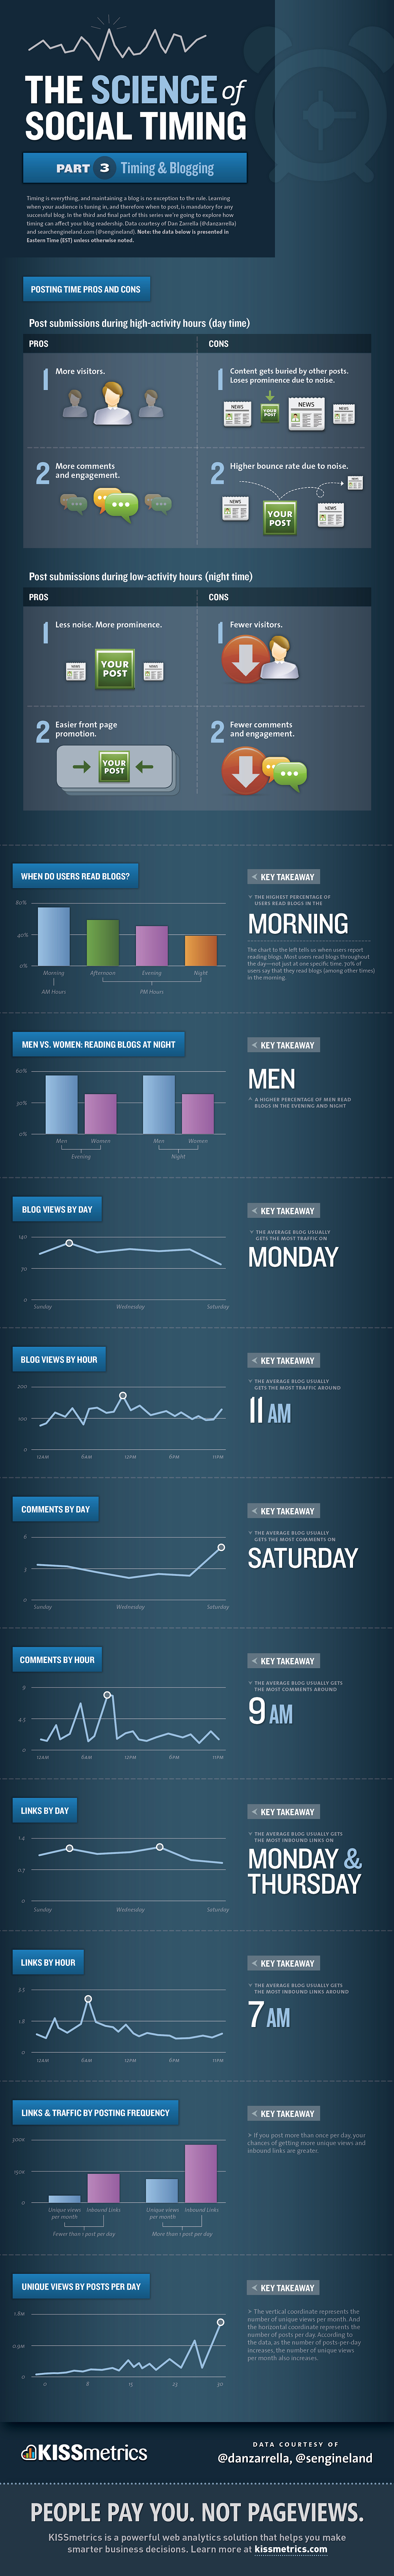 Infographic on How to Get Social Timing Right Part 3: Timing and Blogging